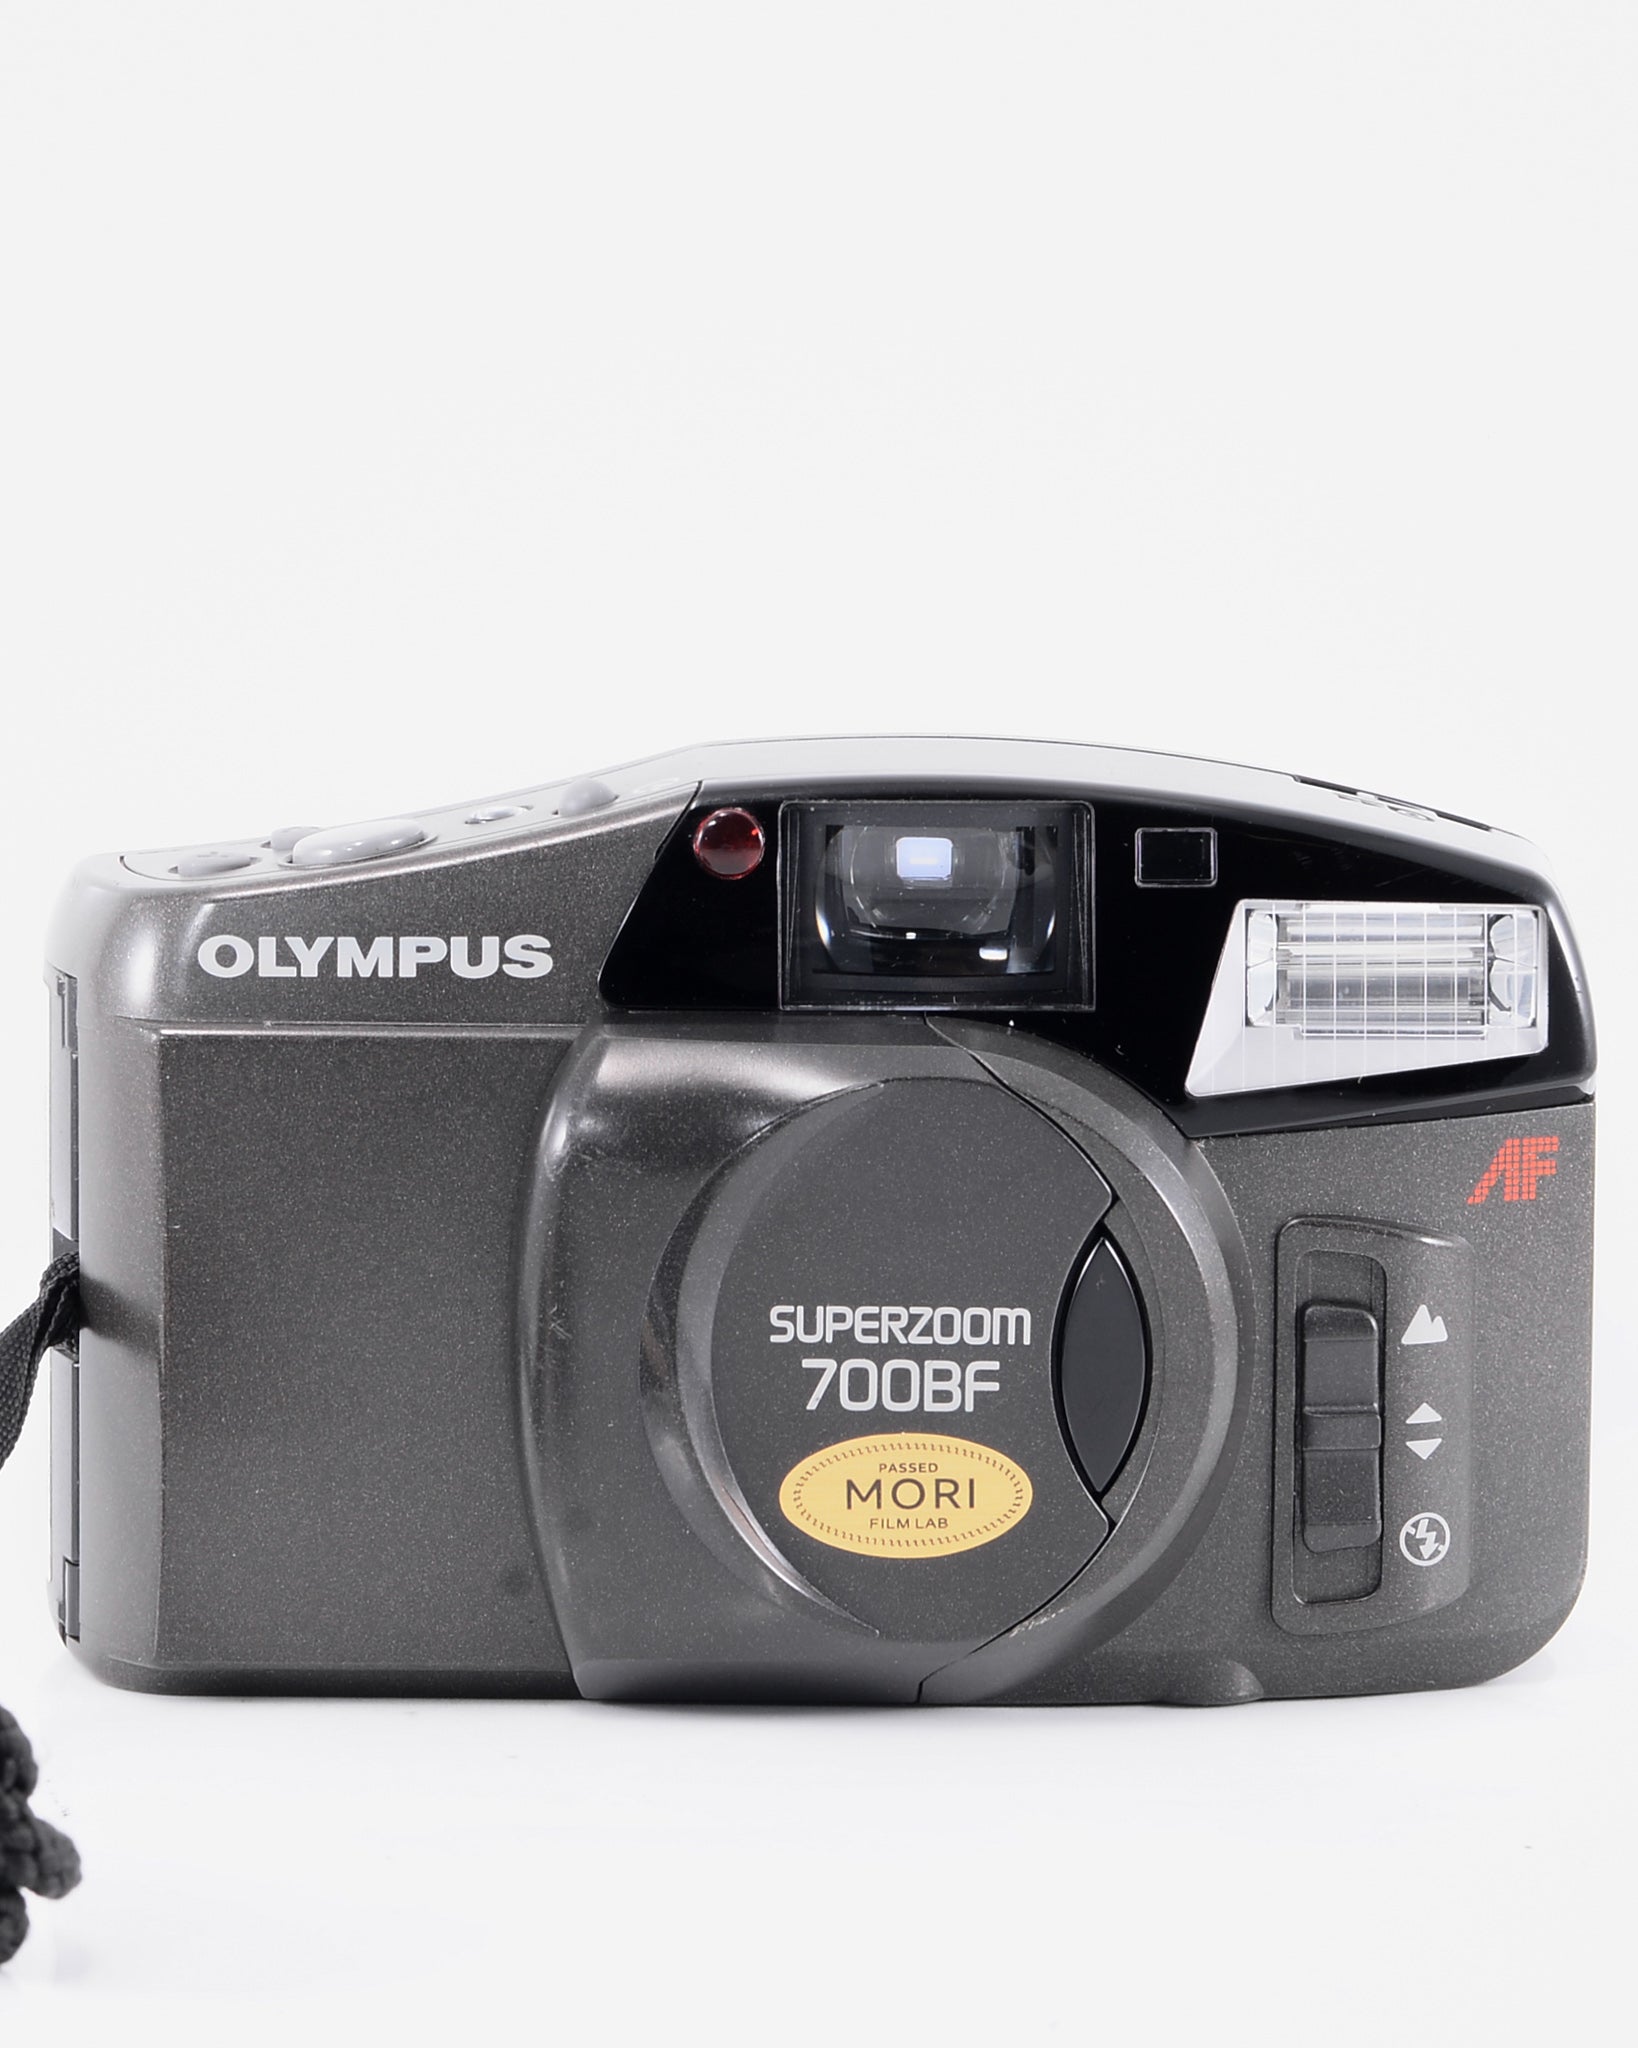 Olympus Superzoom 700BF 35mm Point and Shoot film camera with 38-70mm zoom lens